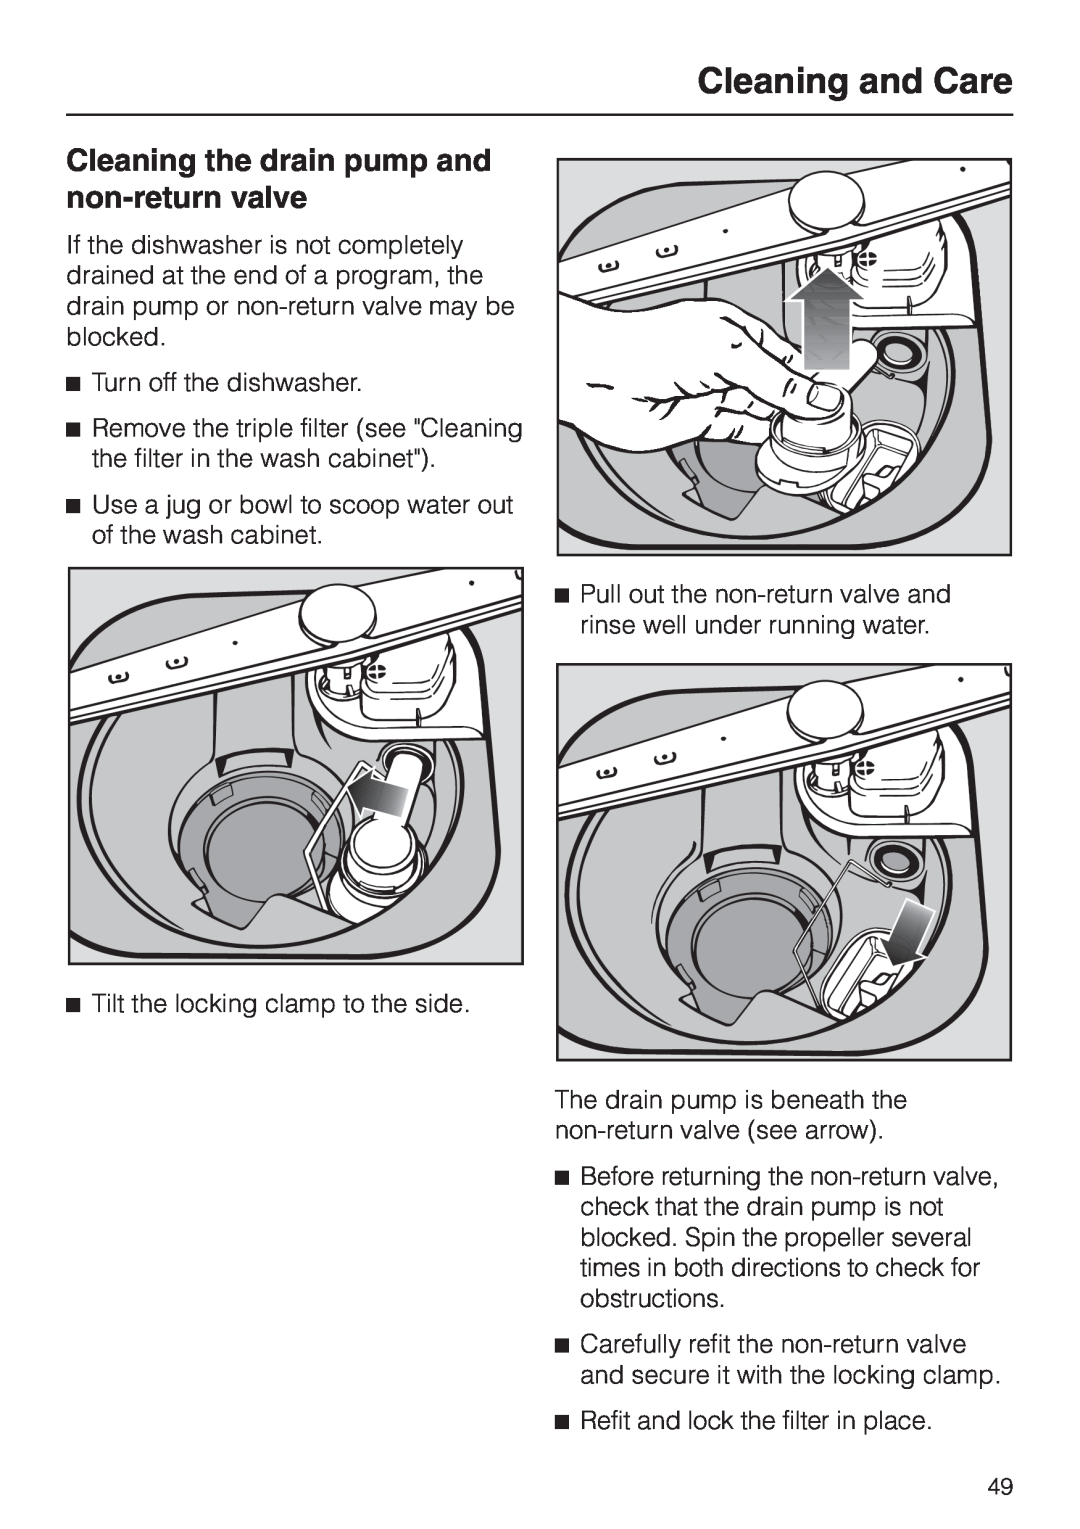 Miele G 892 SC, G892us manual Cleaning the drain pump and non-returnvalve, Cleaning and Care 